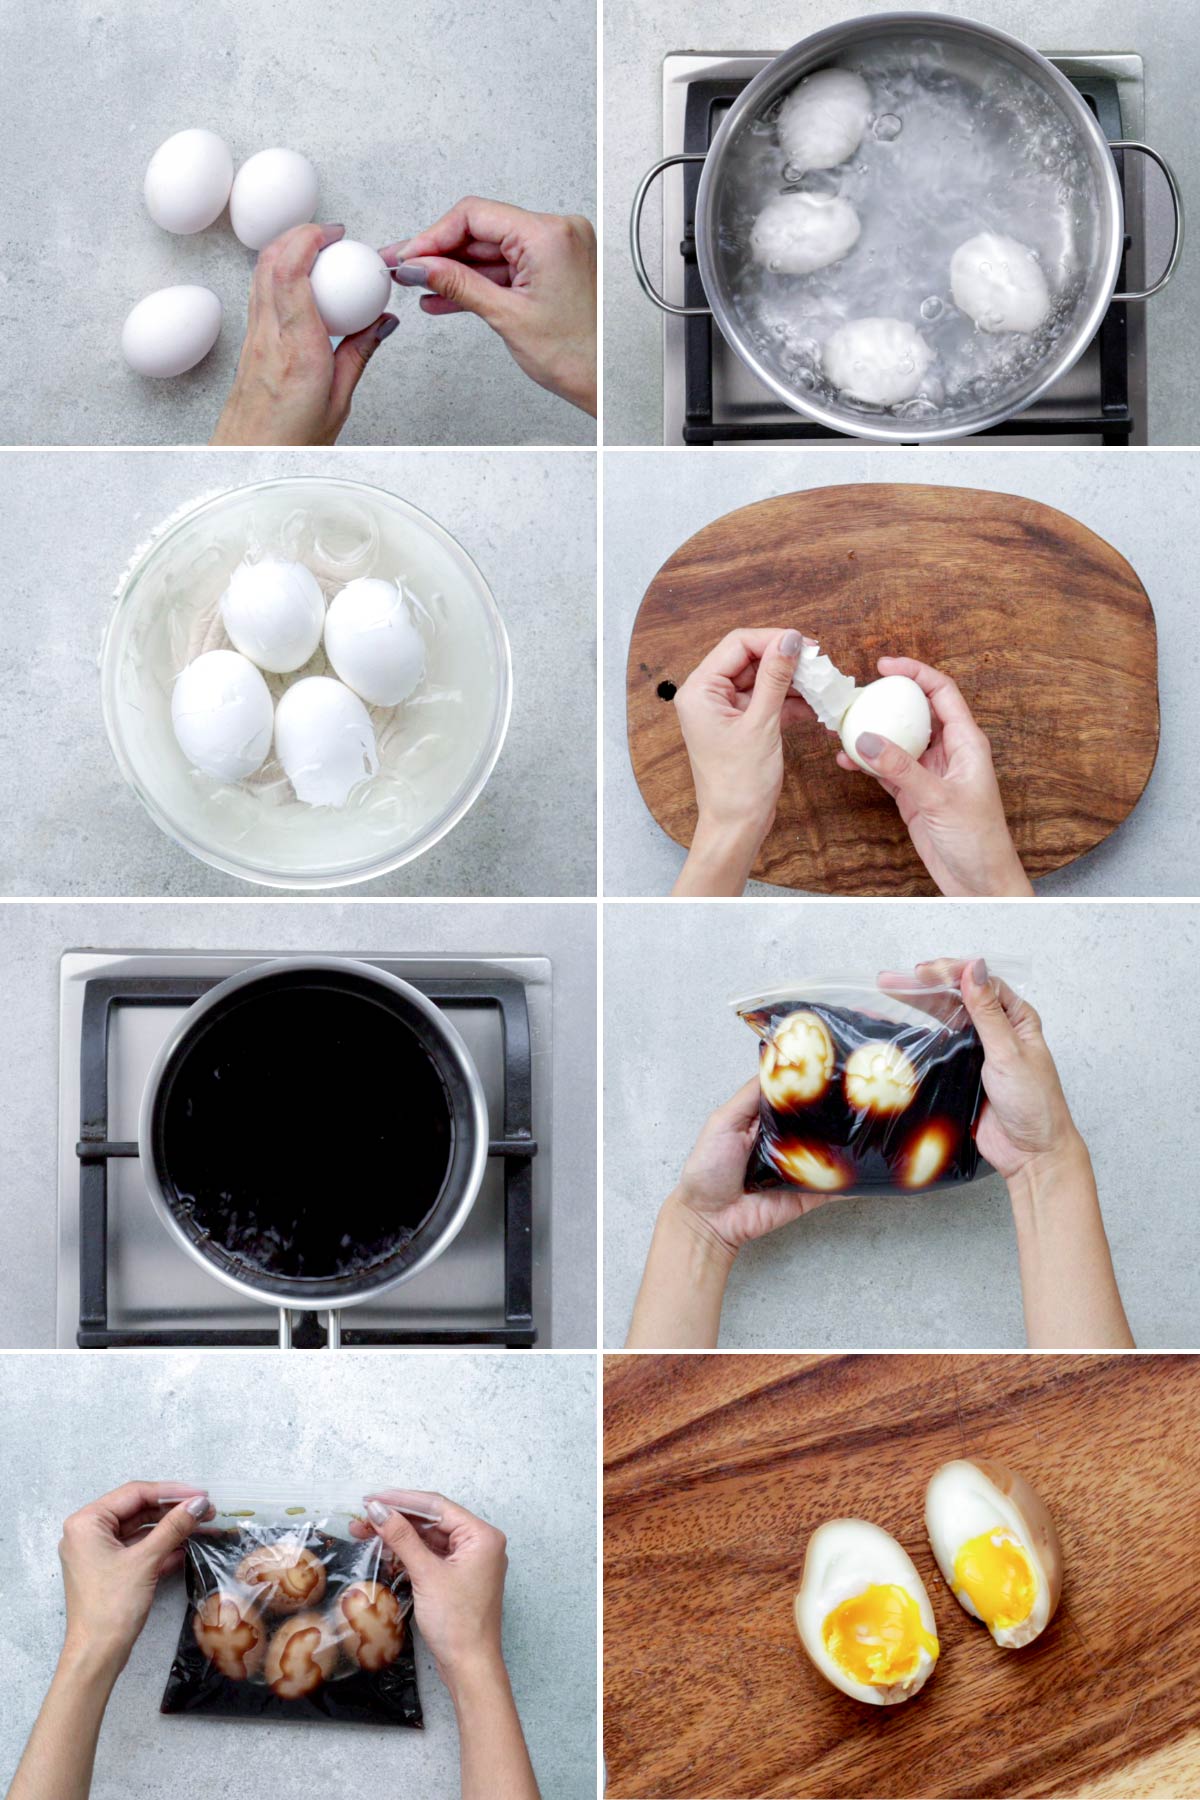 Step by step procedure on how to make ramen eggs.